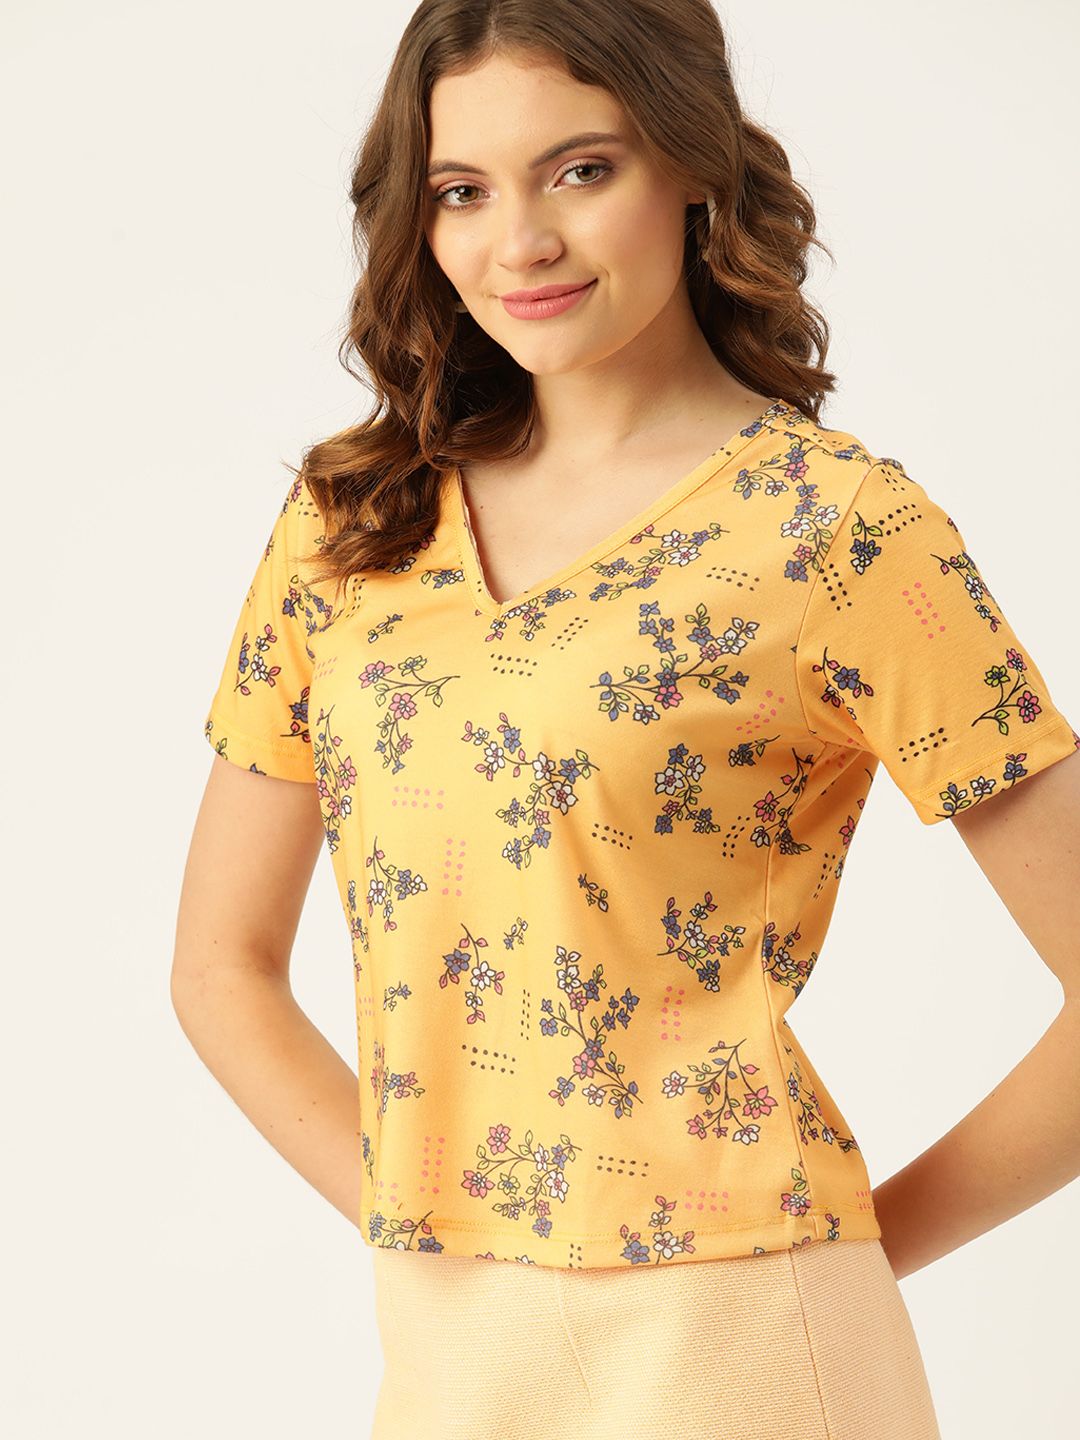 DressBerry Yellow & Blue Floral Print Denim Top Price in India